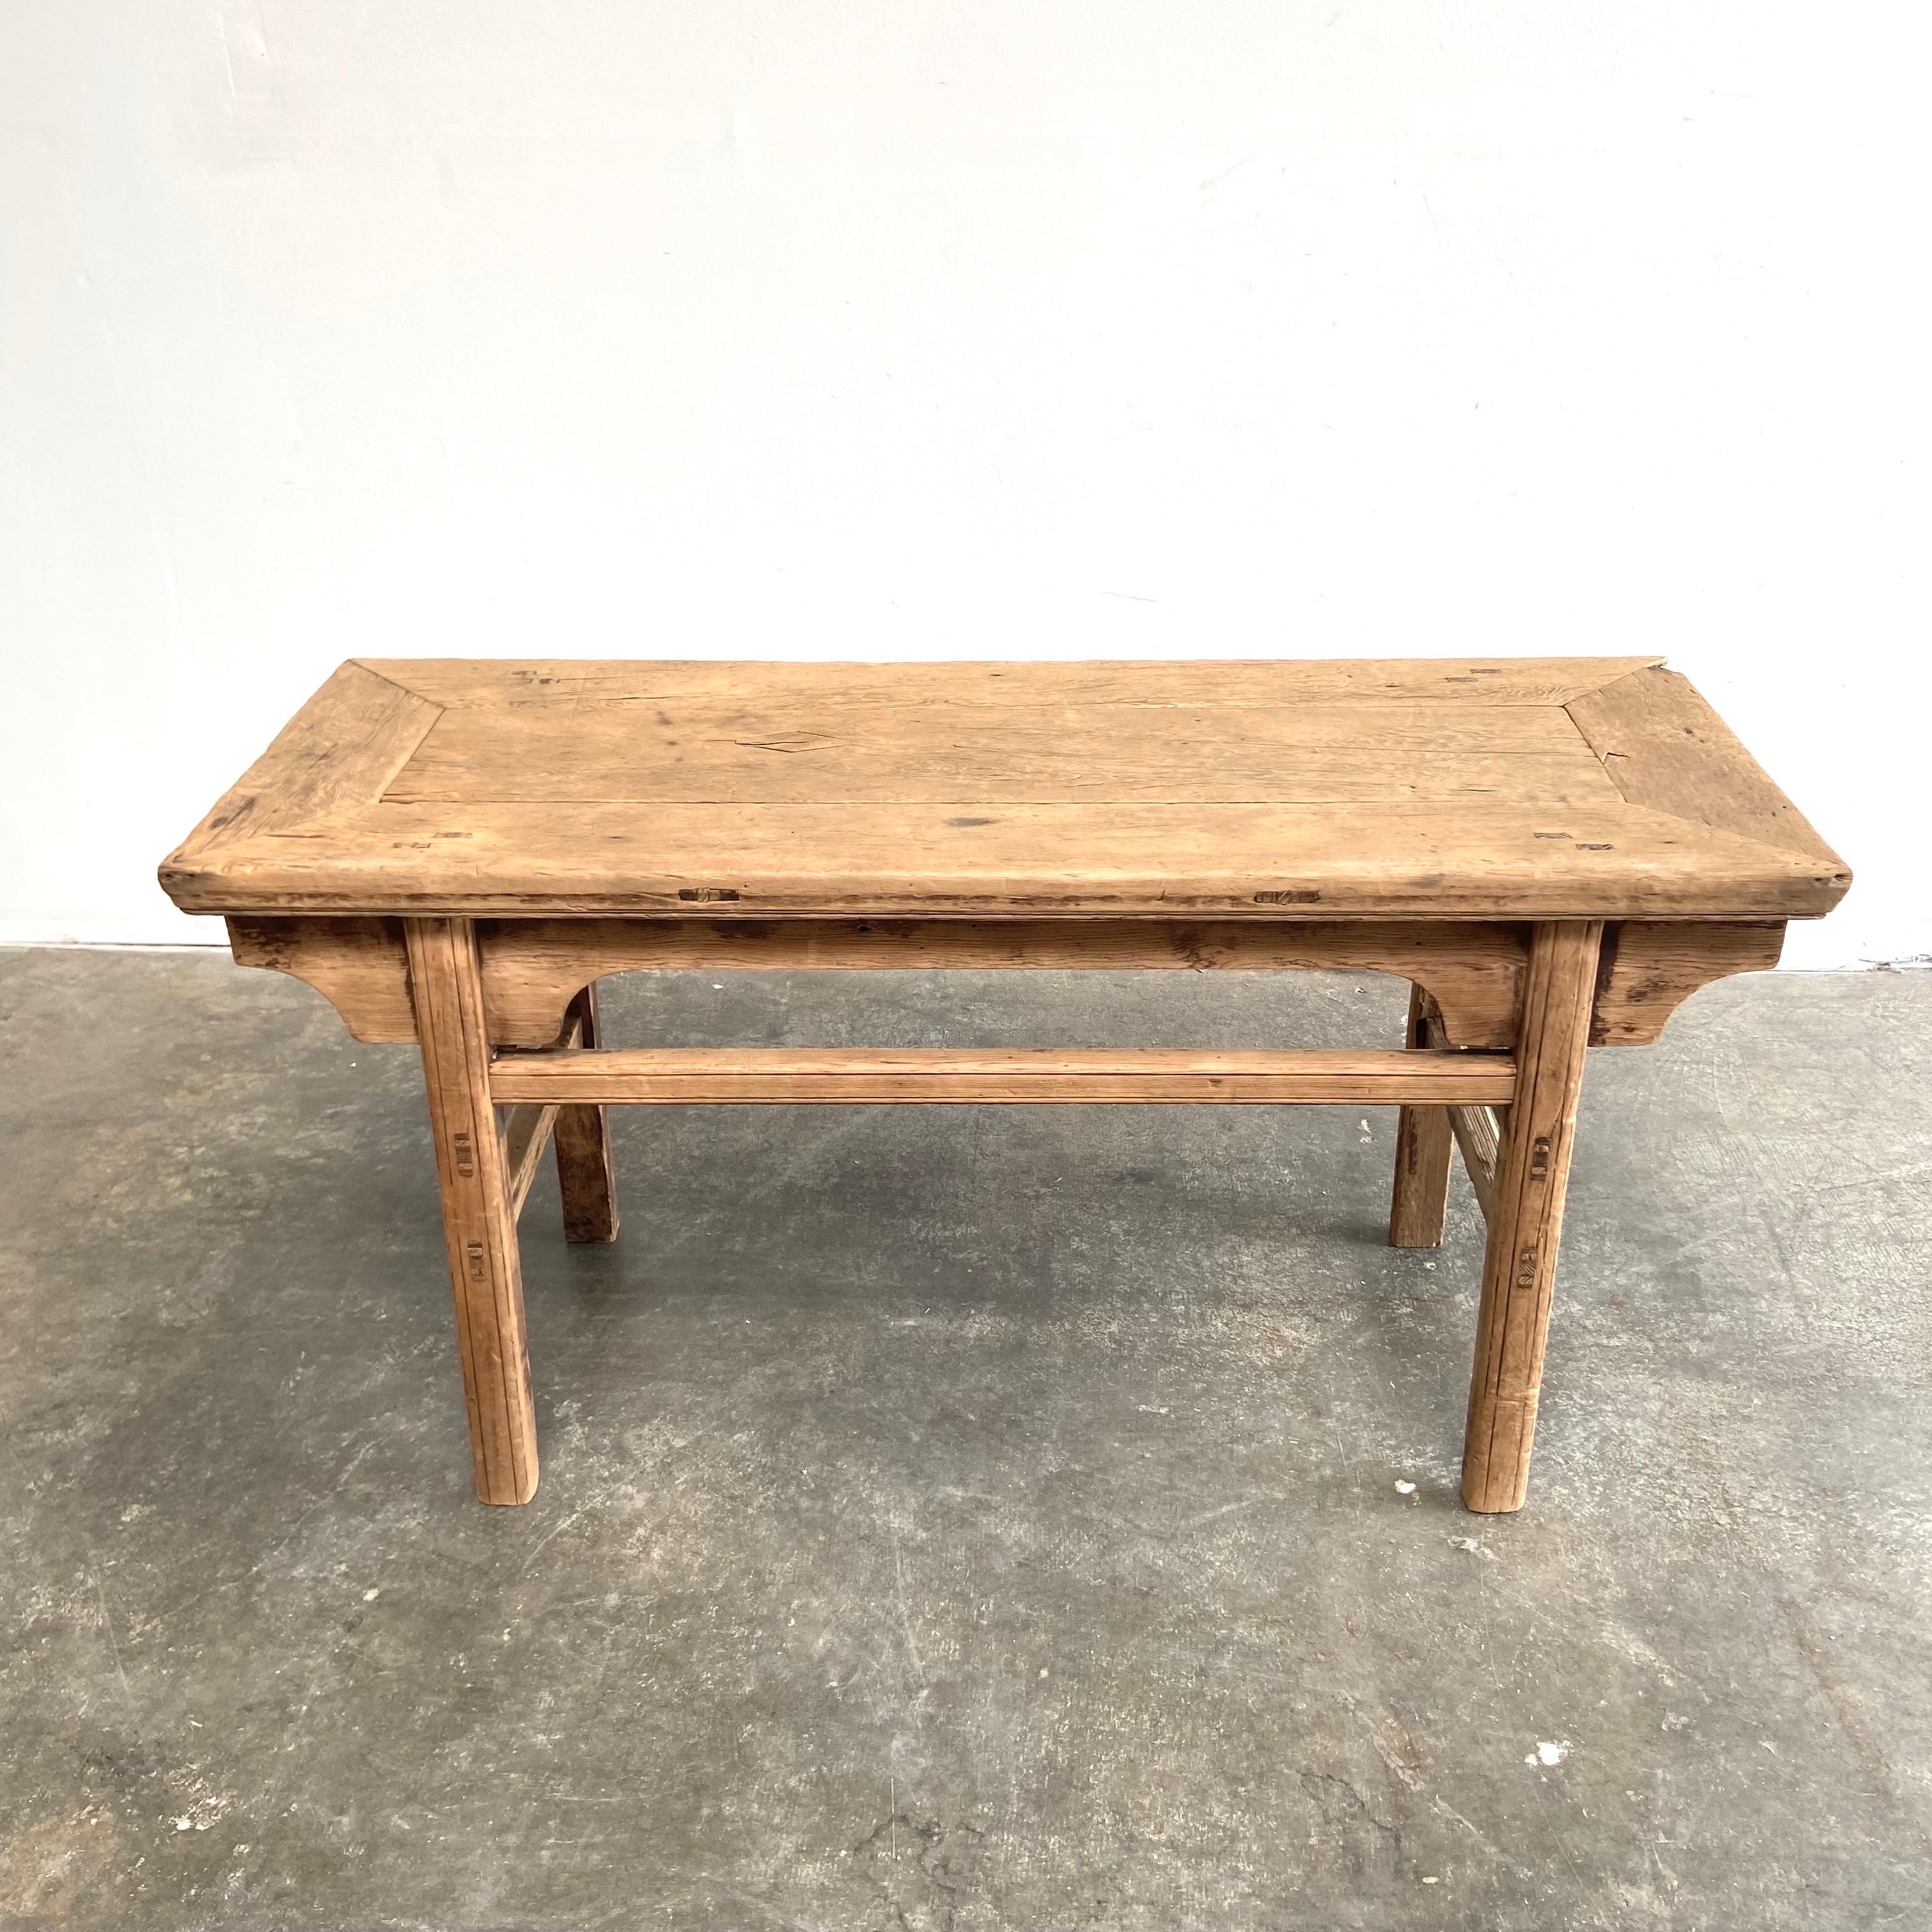 Vintage Antique Elm Wood console table Made from Vintage reclaimed elm wood. Beautiful antique patina, with weathering and age, these are solid and sturdy ready for daily use, use as a entry table, sofa table or console in a dining room. Great in a